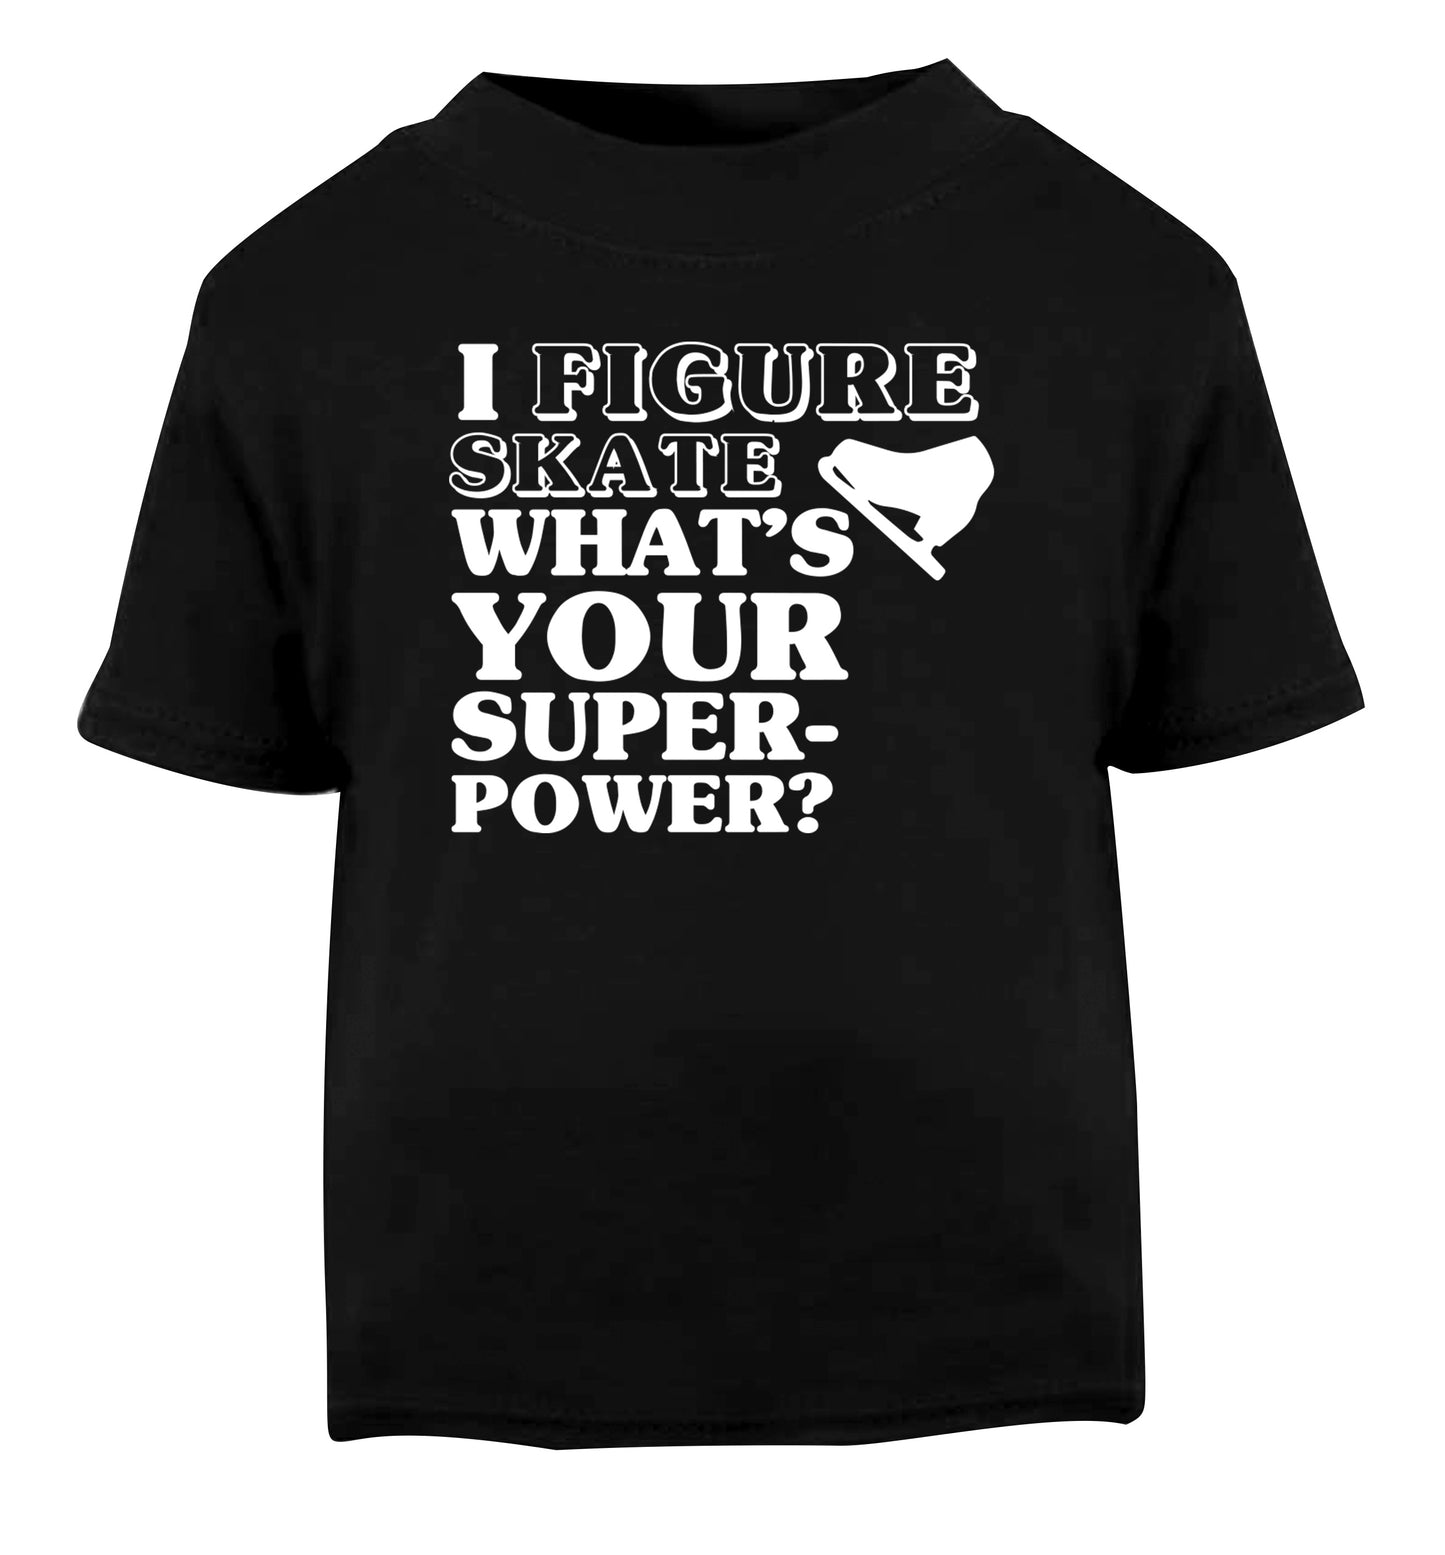 I figure skate what's your superpower? Black Baby Toddler Tshirt 2 years